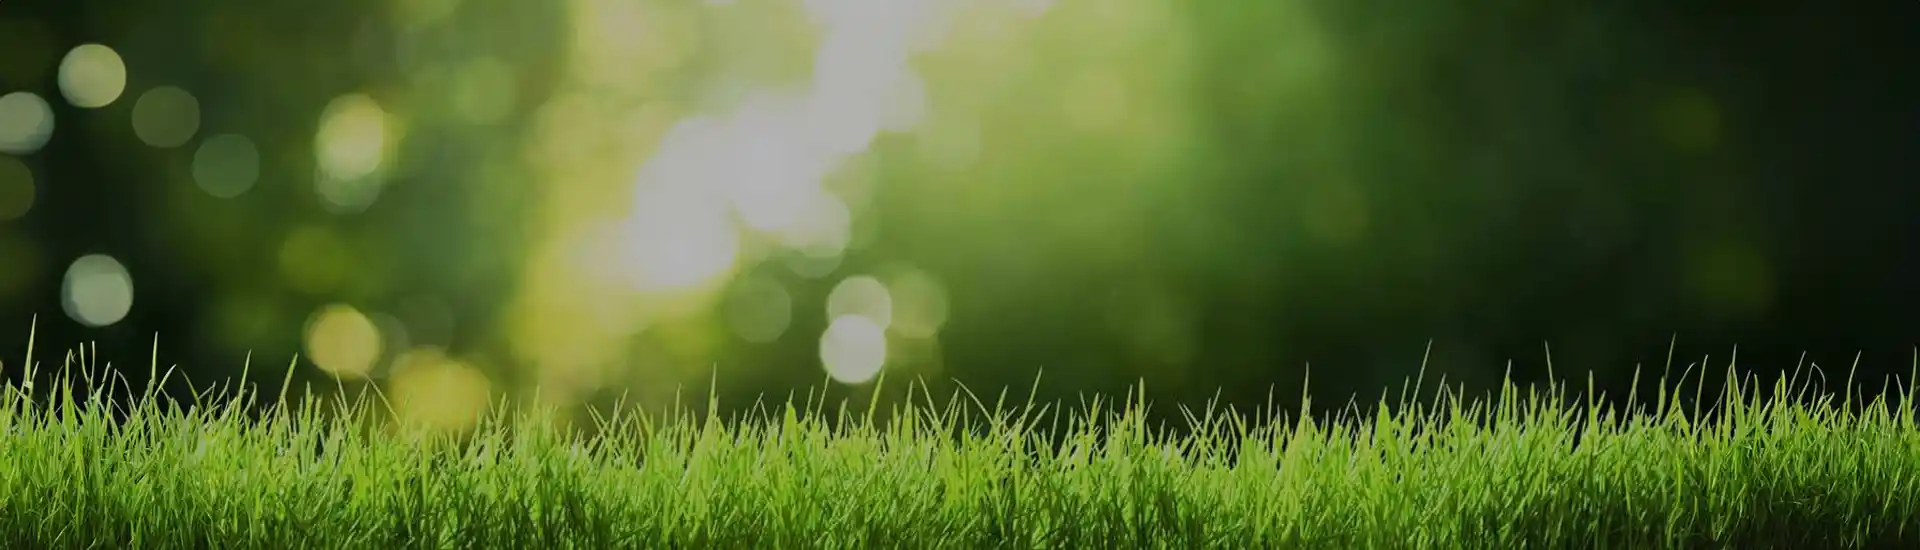 Comprehensive Lawn Care Solutions for a Vibrant, Healthy Yard